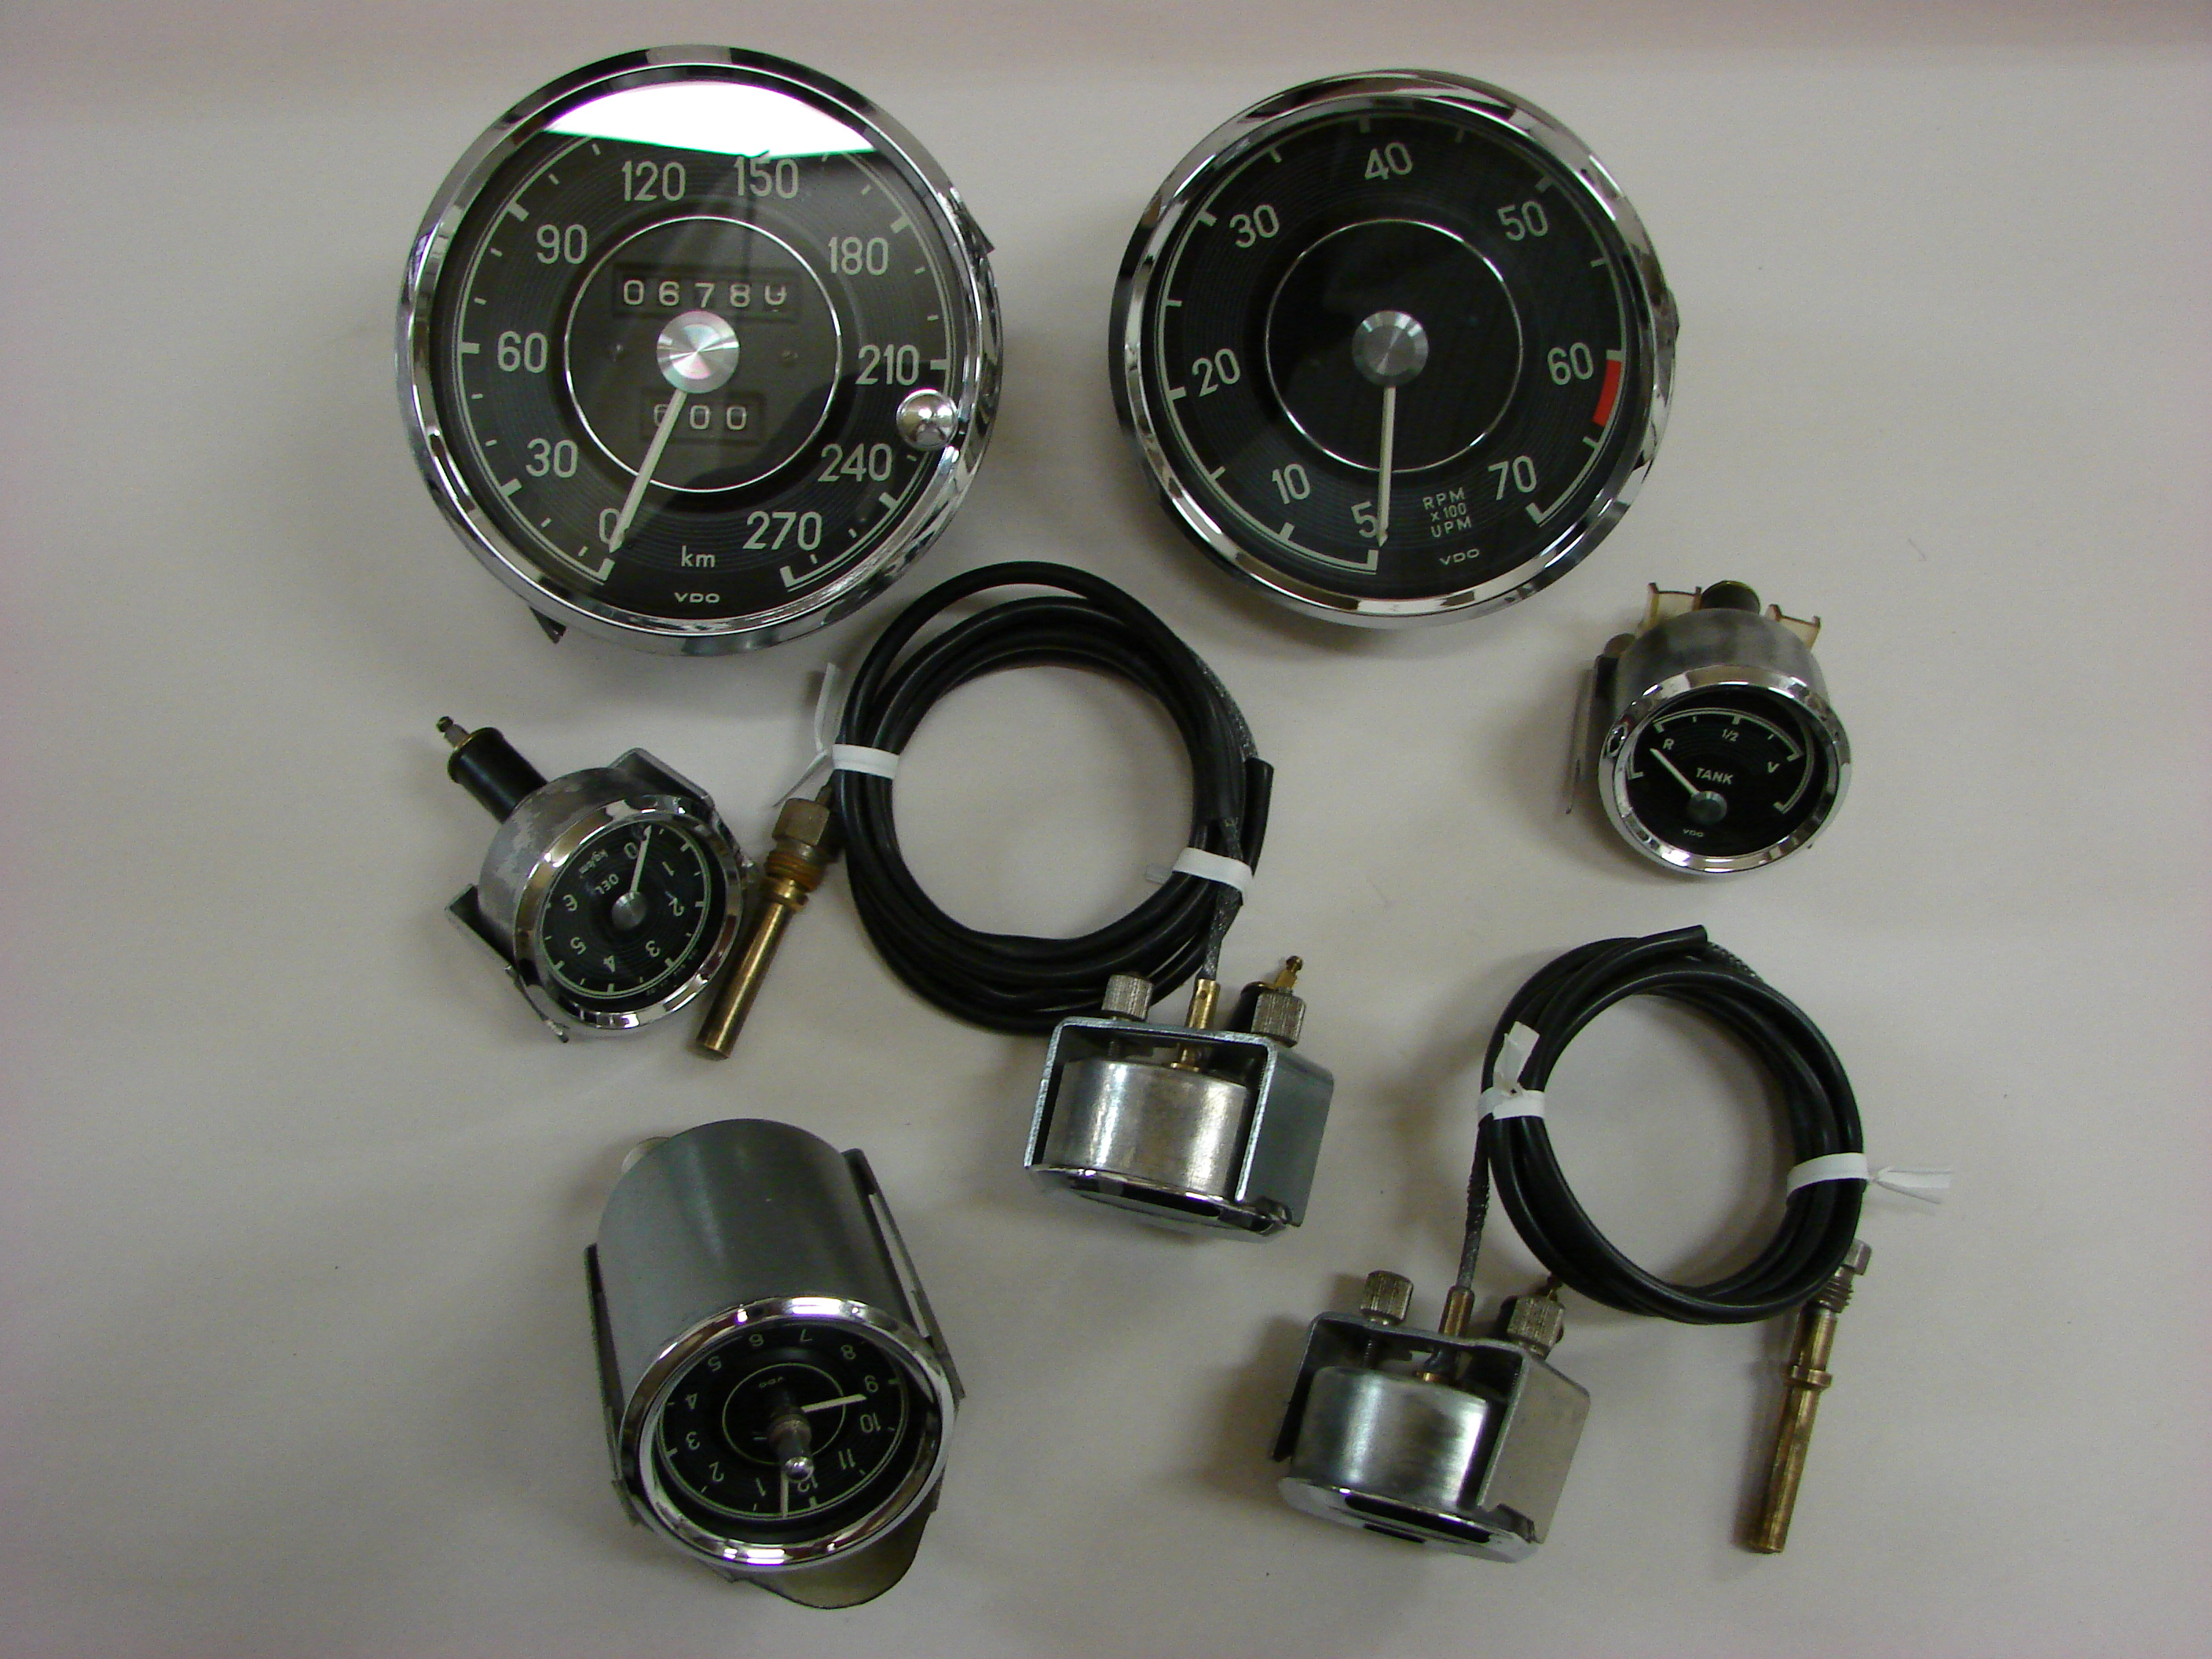 Speedometers and other devices with wires